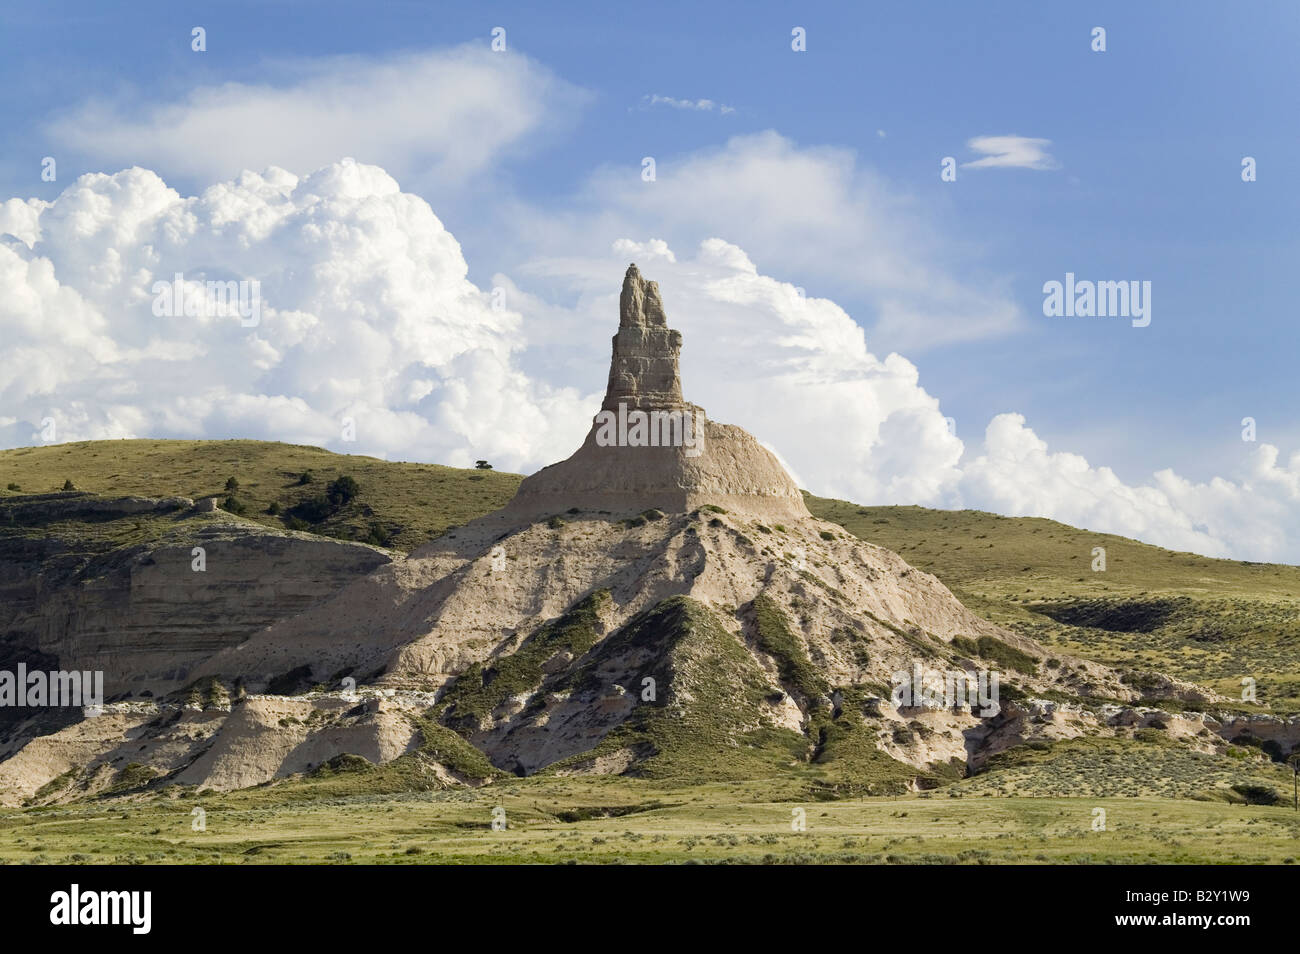 Chimney Rock National Historic Site, Nebraska, the most famous site on the Oregon Trail for early settlers and pioneers Stock Photo